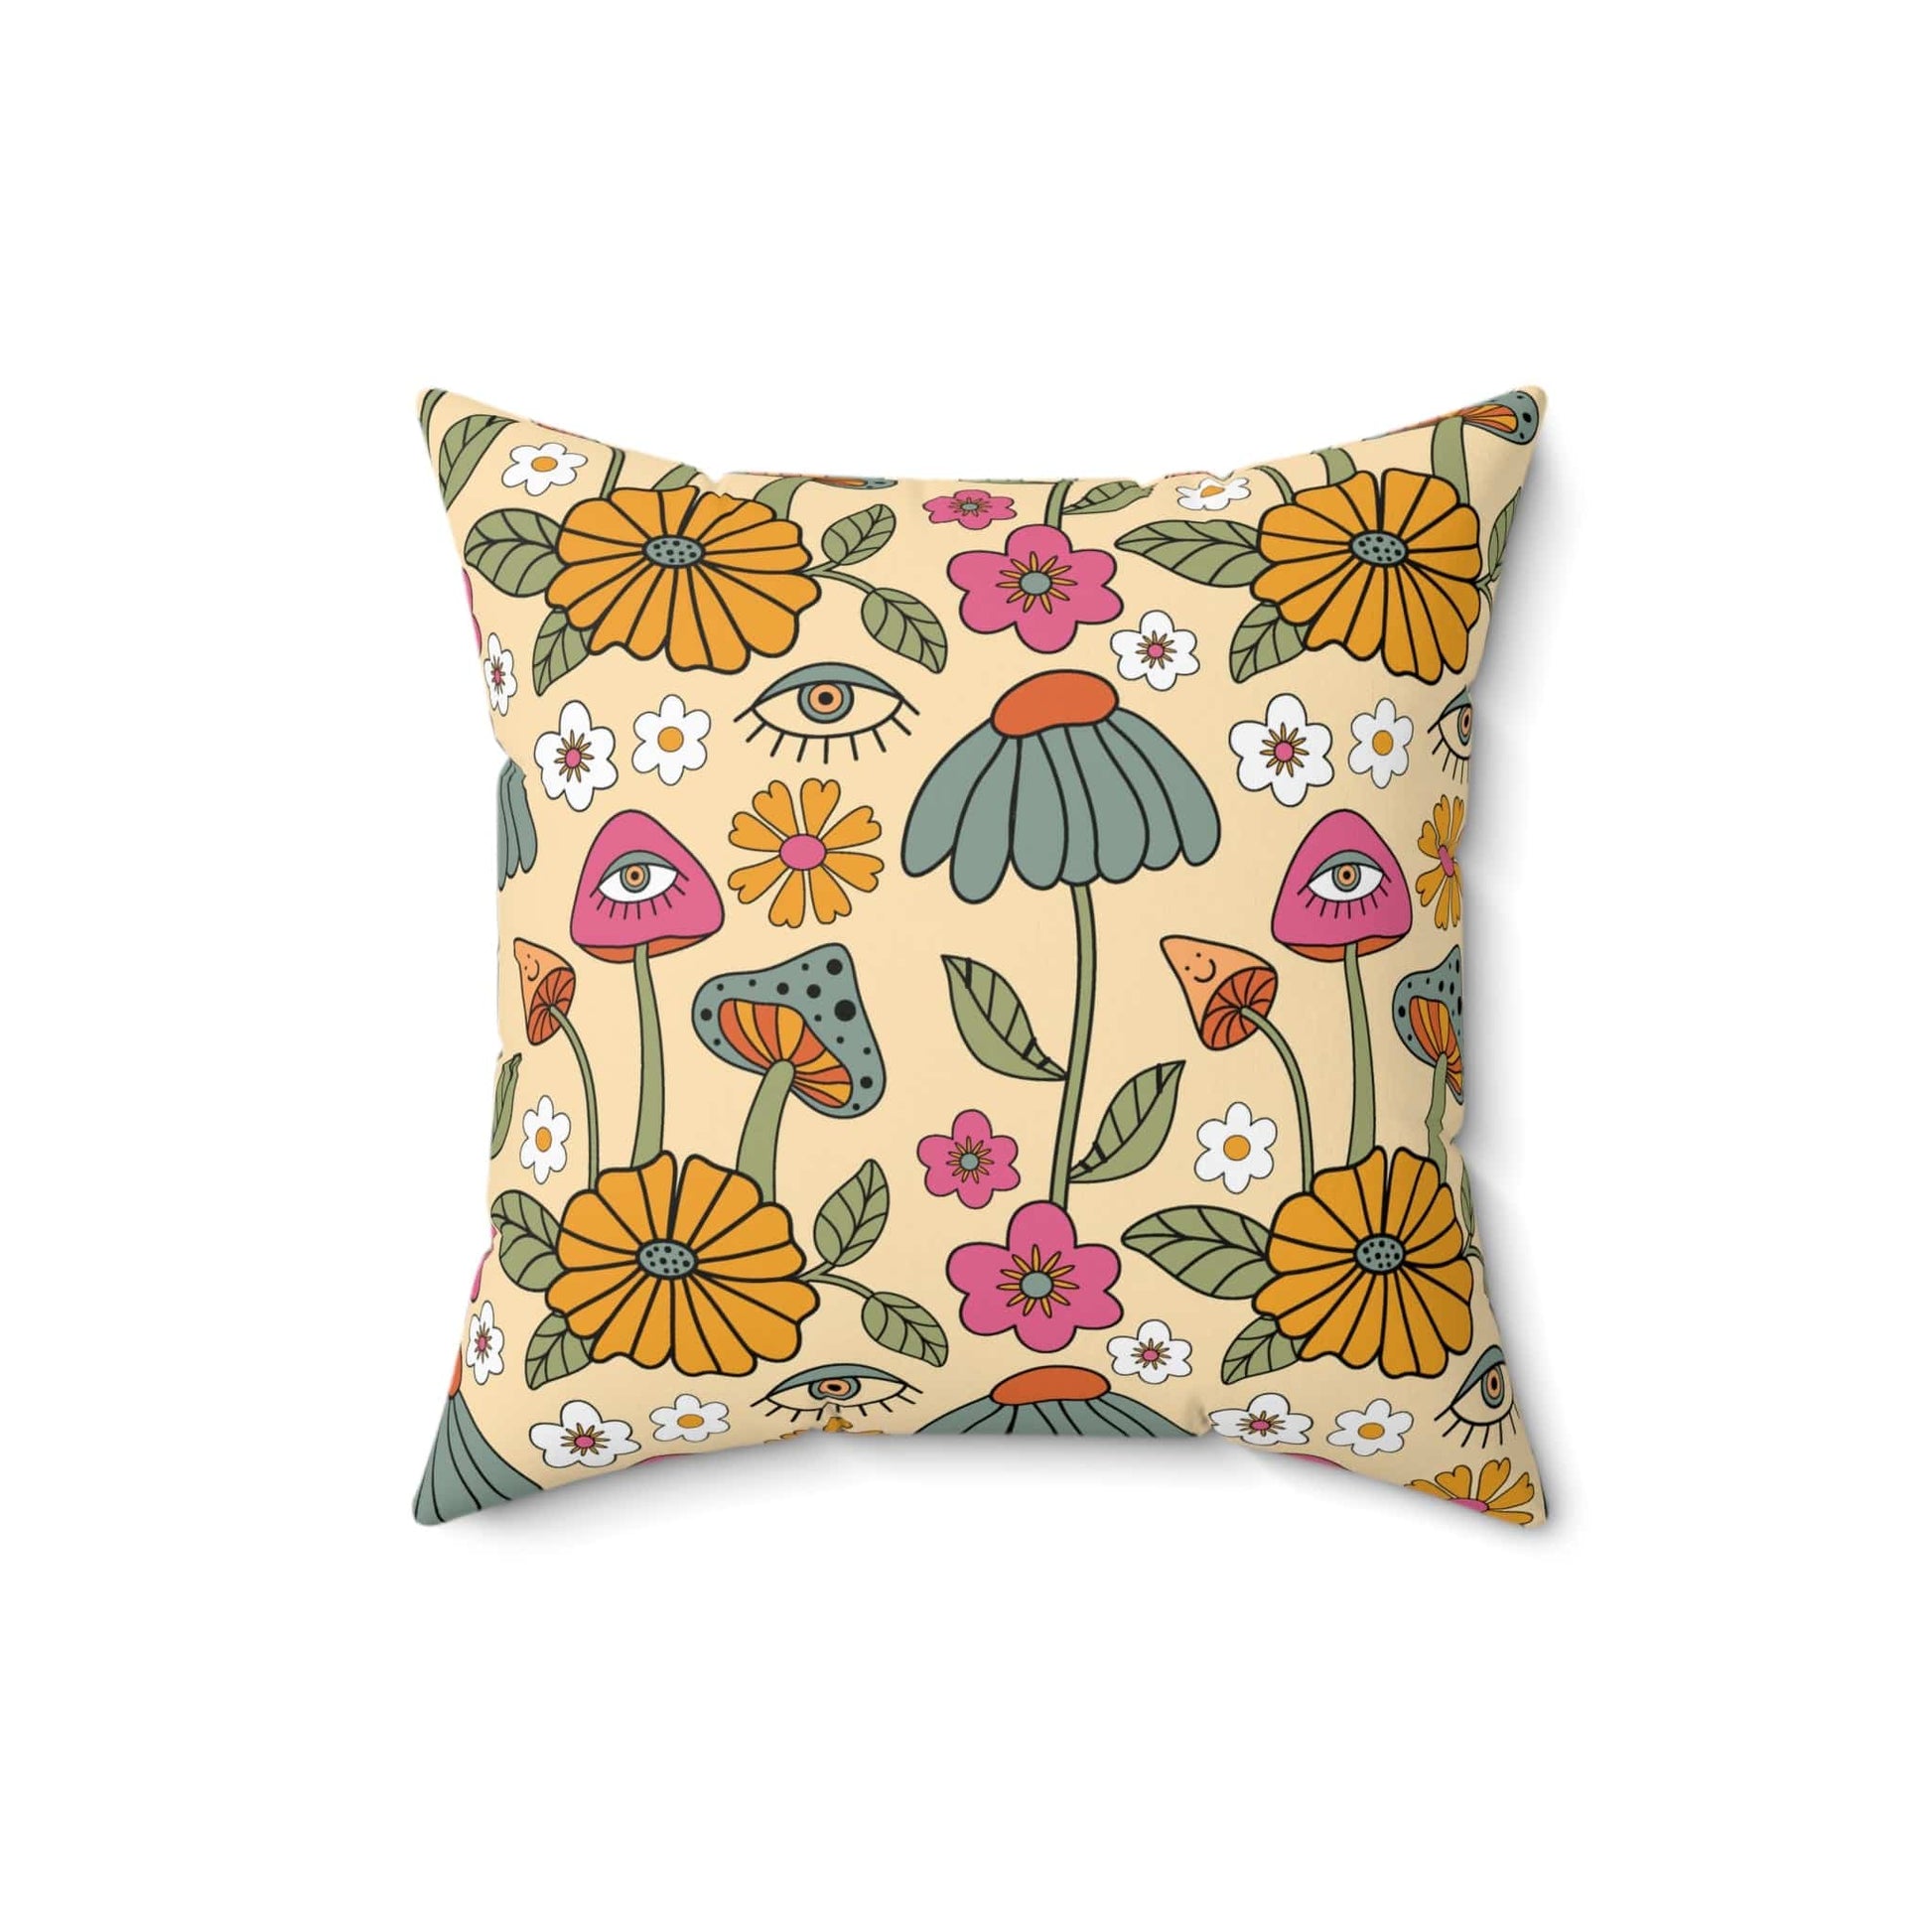 Kate McEnroe New York Hippie Mushroom Cottagecore Aesthetic Throw Pillow with Insert, Retro Floral 70s Psychedelic Accent Pillow Throw Pillows